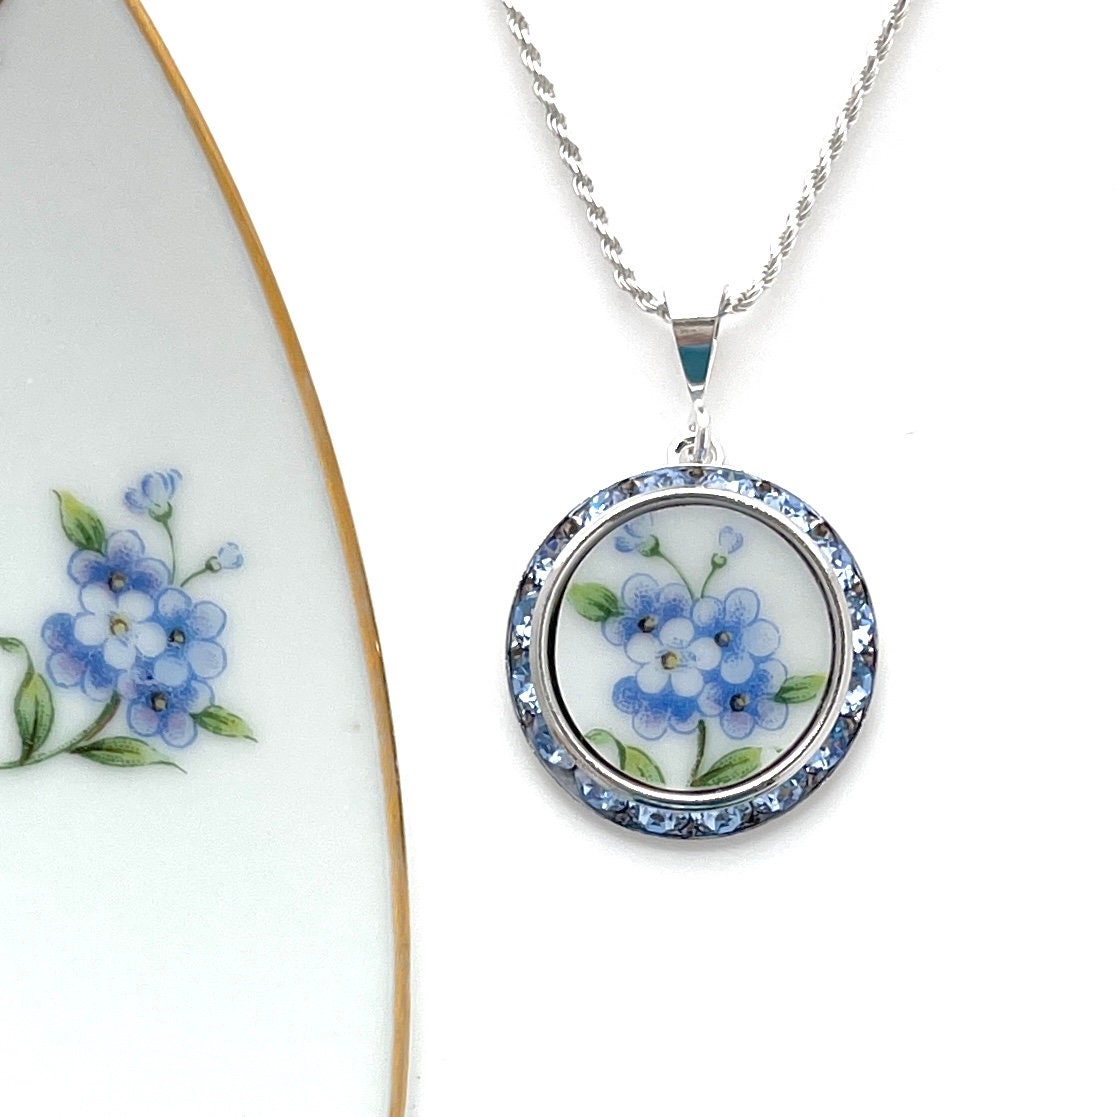 20th Anniversary China Jewelry Gift for Wife Forget Me Nots Broken China Jewelry Unique Gifts for Women